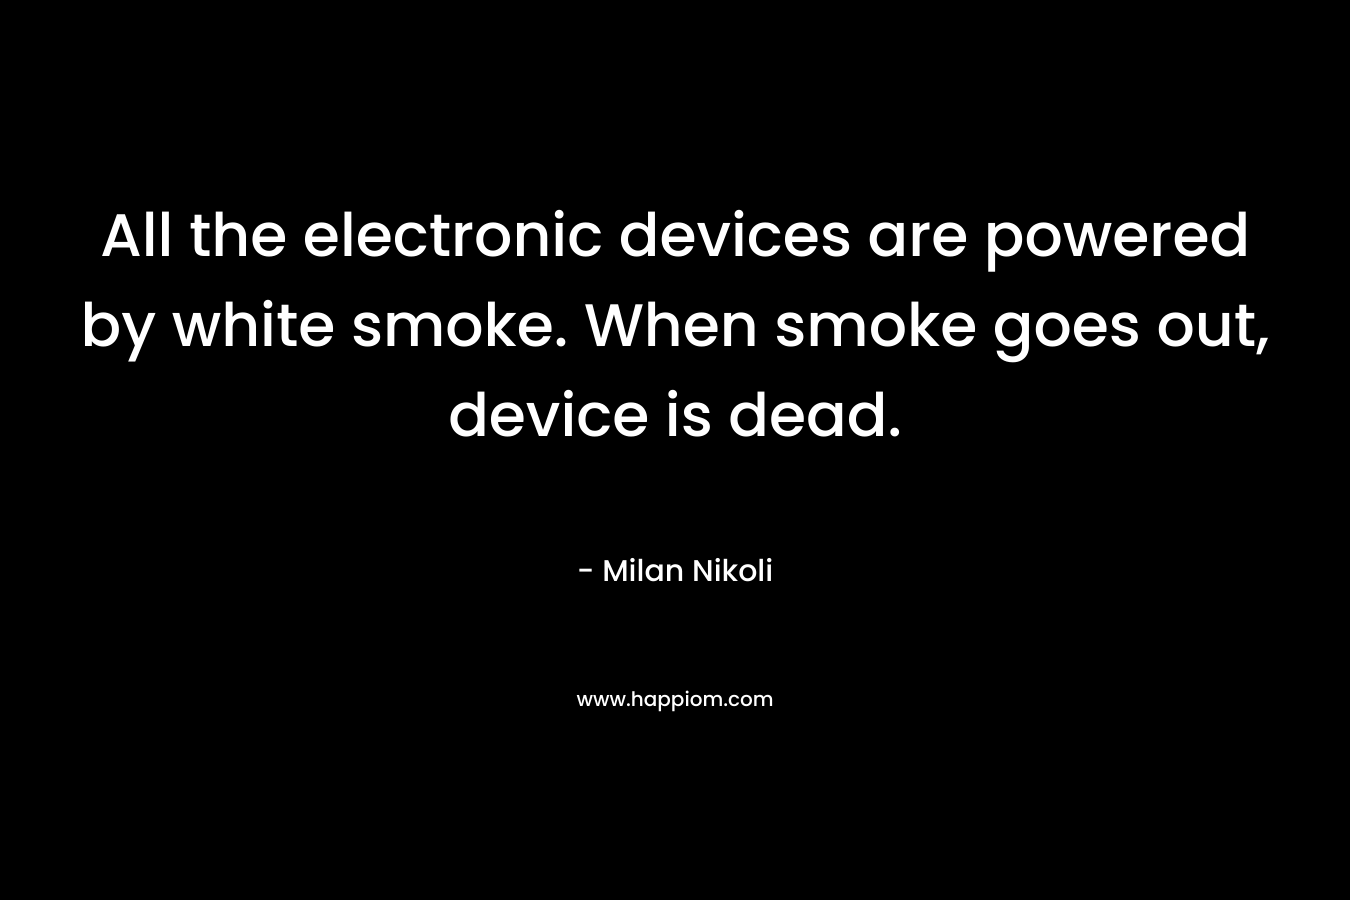 All the electronic devices are powered by white smoke. When smoke goes out, device is dead.